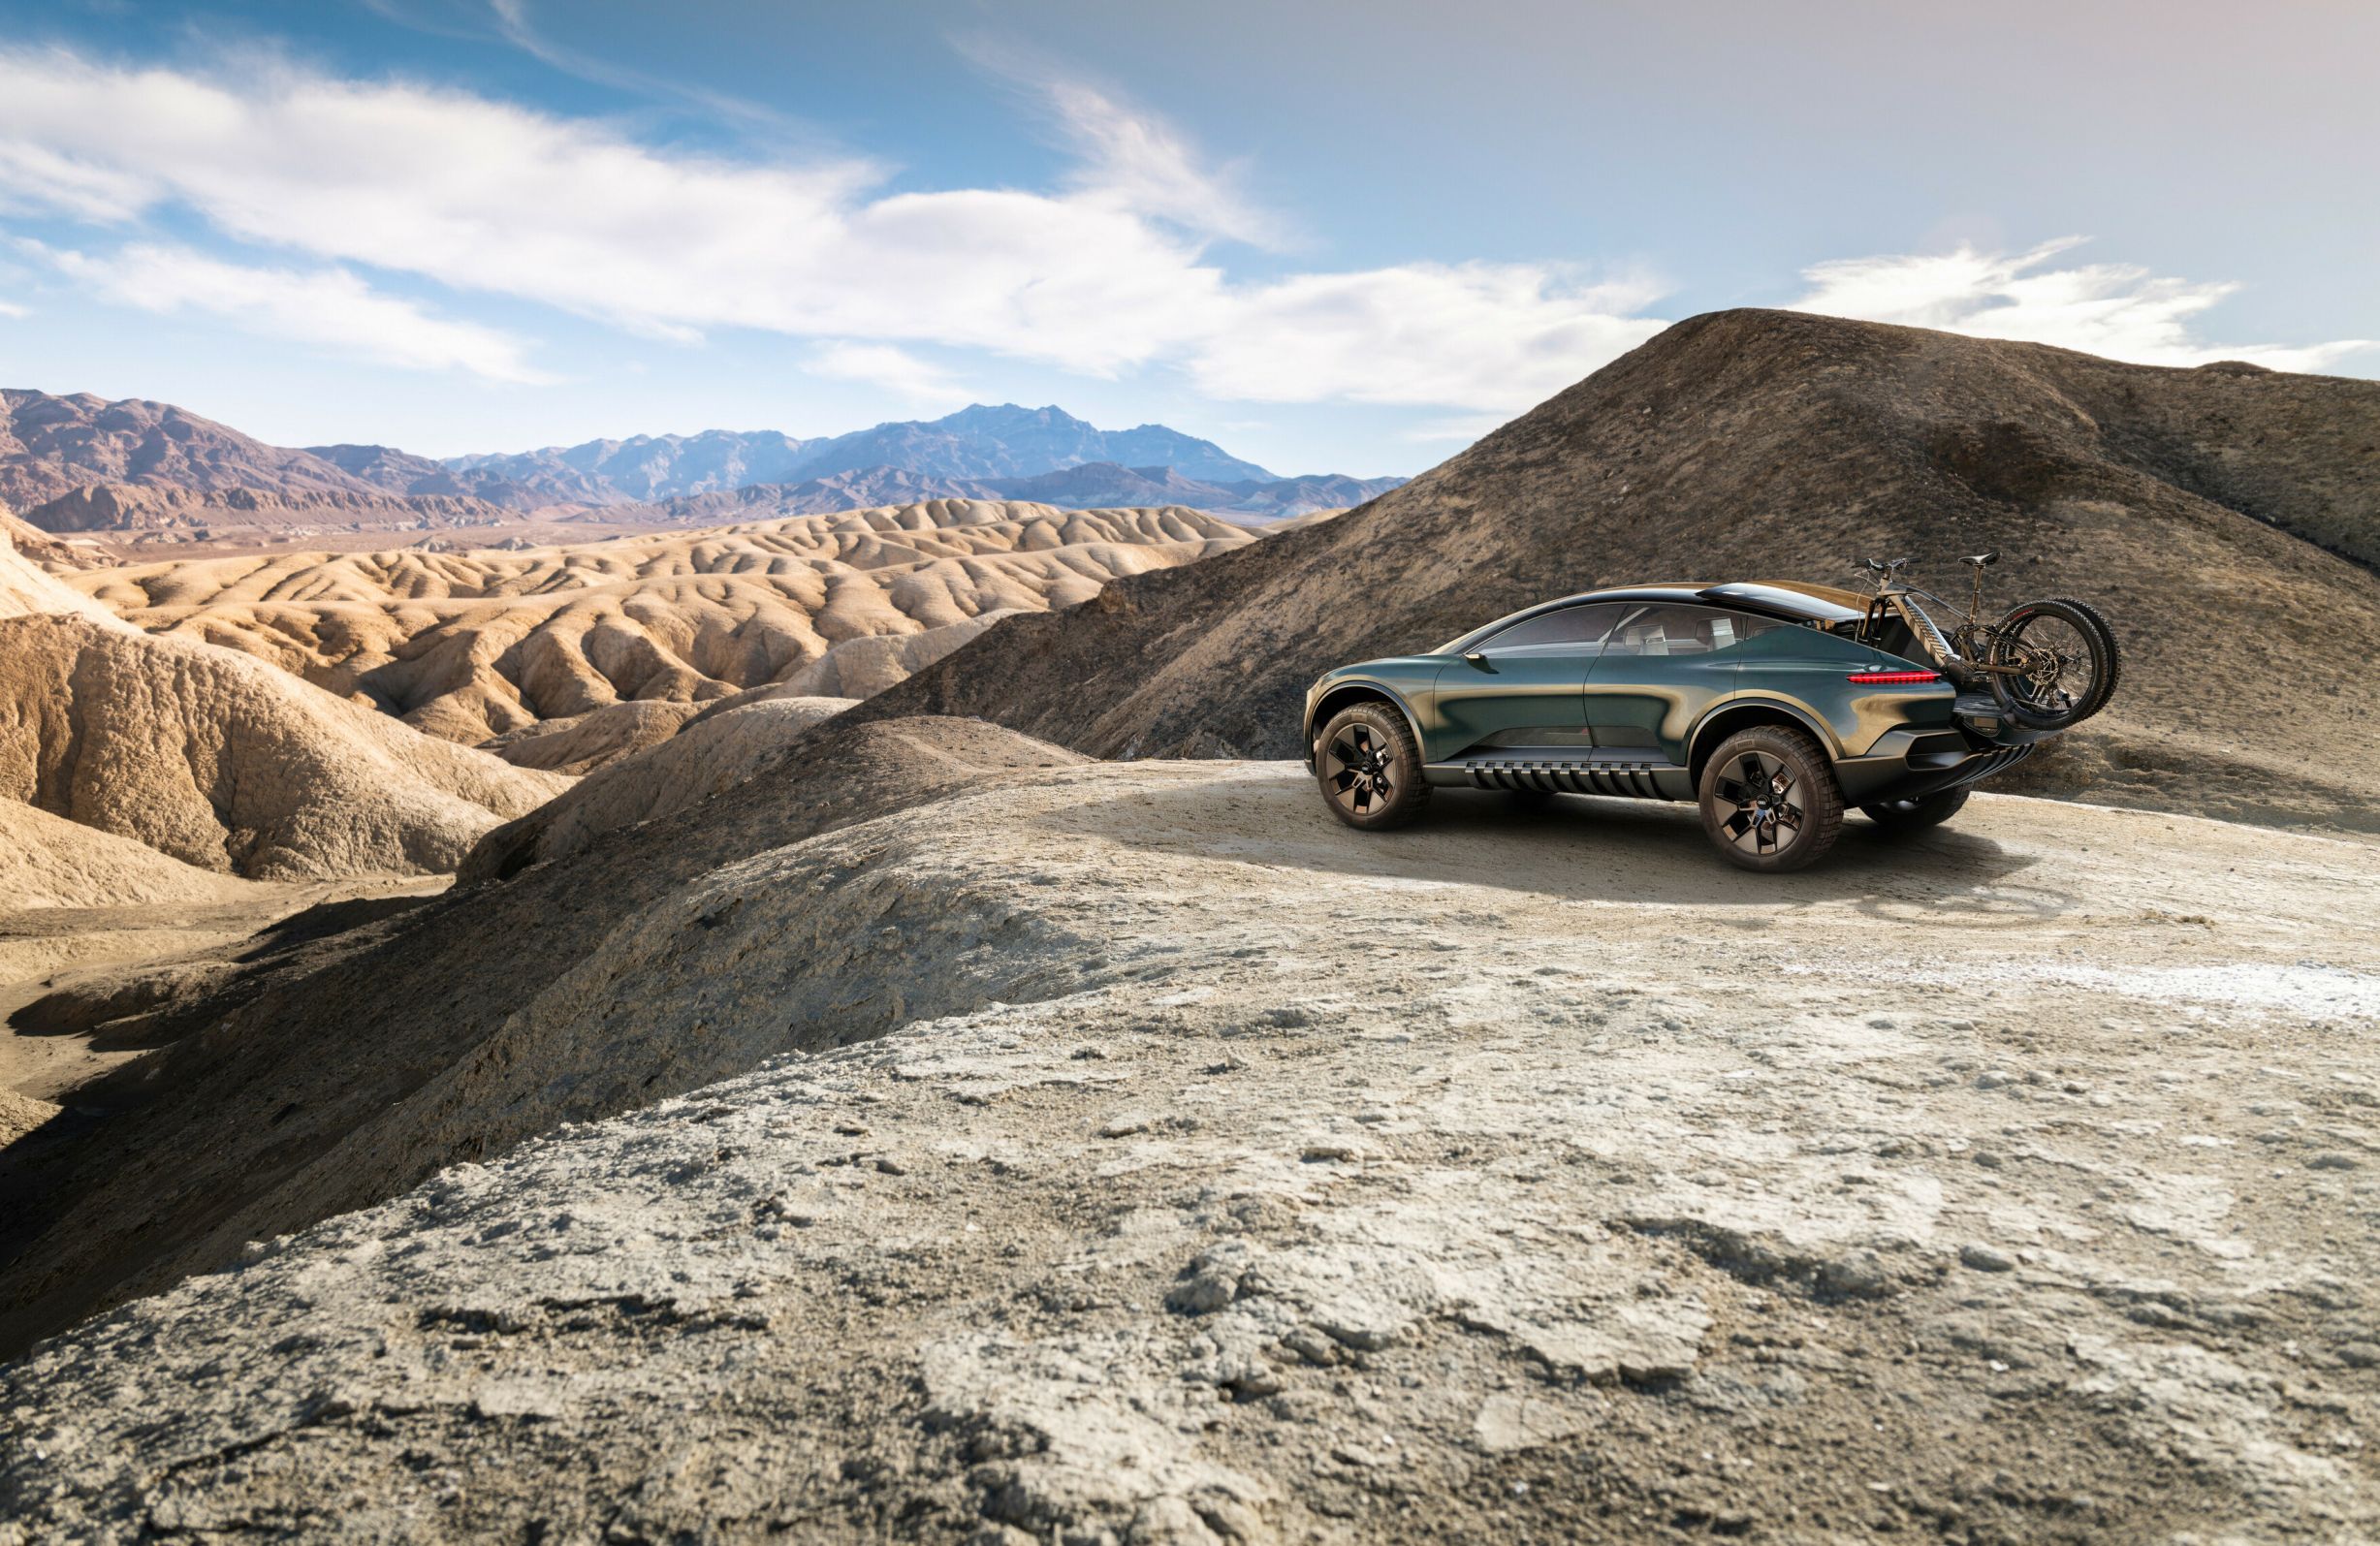 The Audi activesphere concept – offering maximum versatility for an active lifestyle both on and off-road